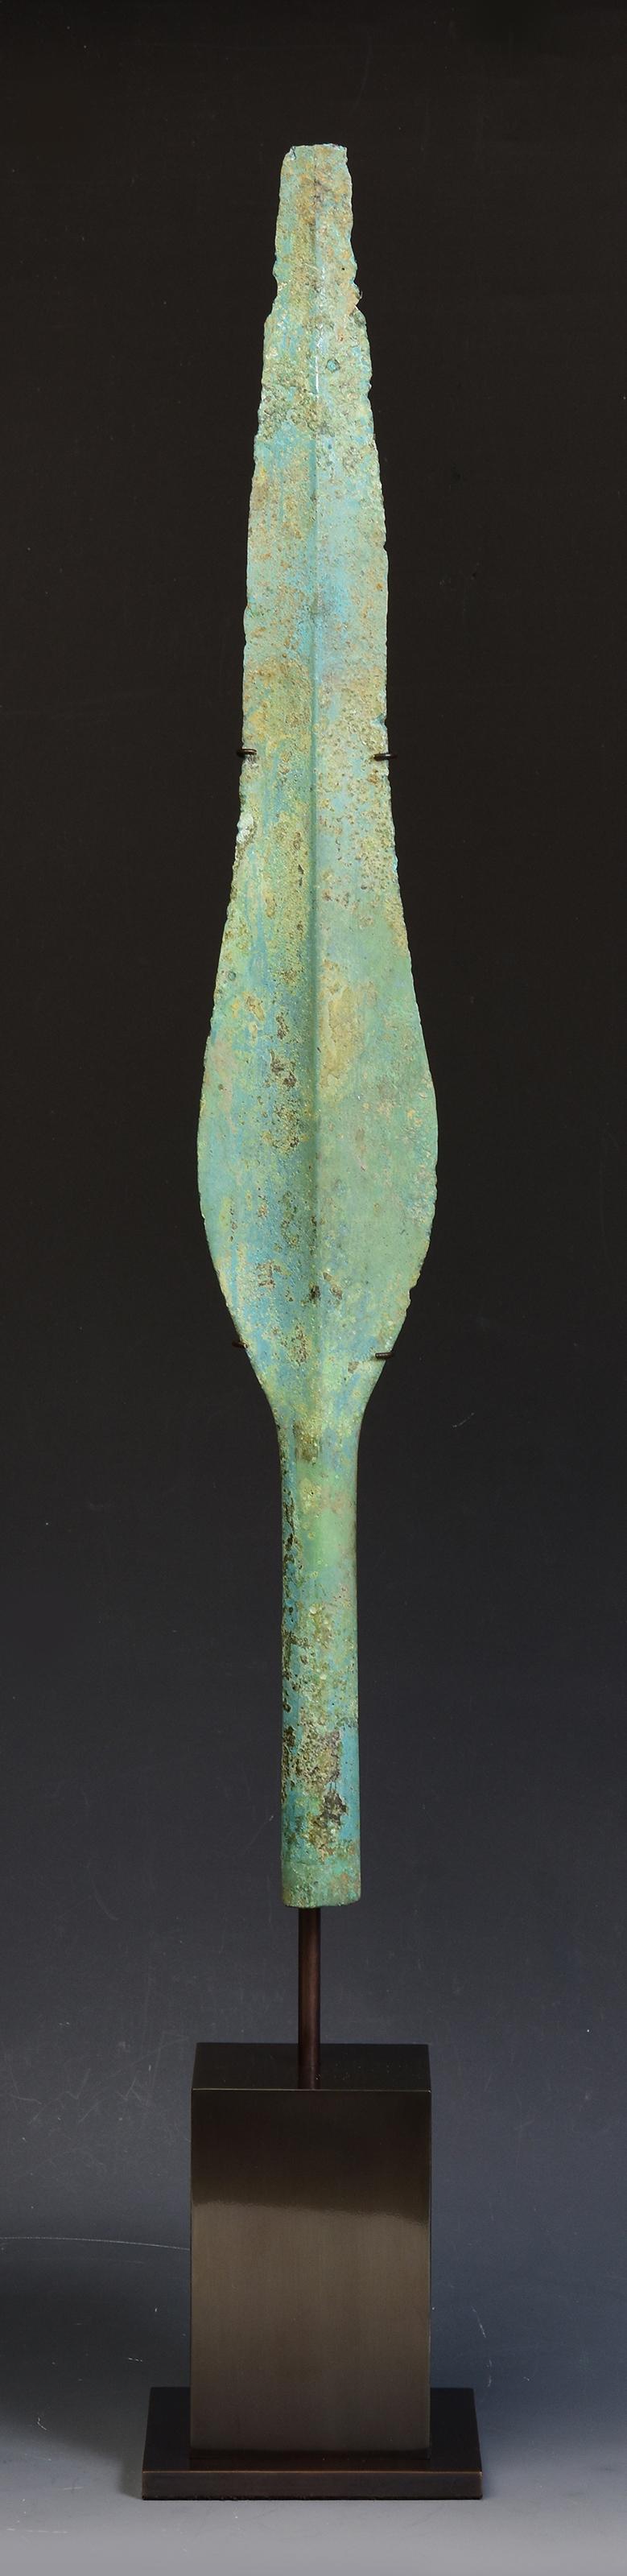 Ancient Luristan bronze spear with excellent green patina.

Luristan bronze comes from the province of Lorestan, a region of nowadays Western Iran in the Zagros Mountains. With its rich and long history, Luristan culture is well-known for its